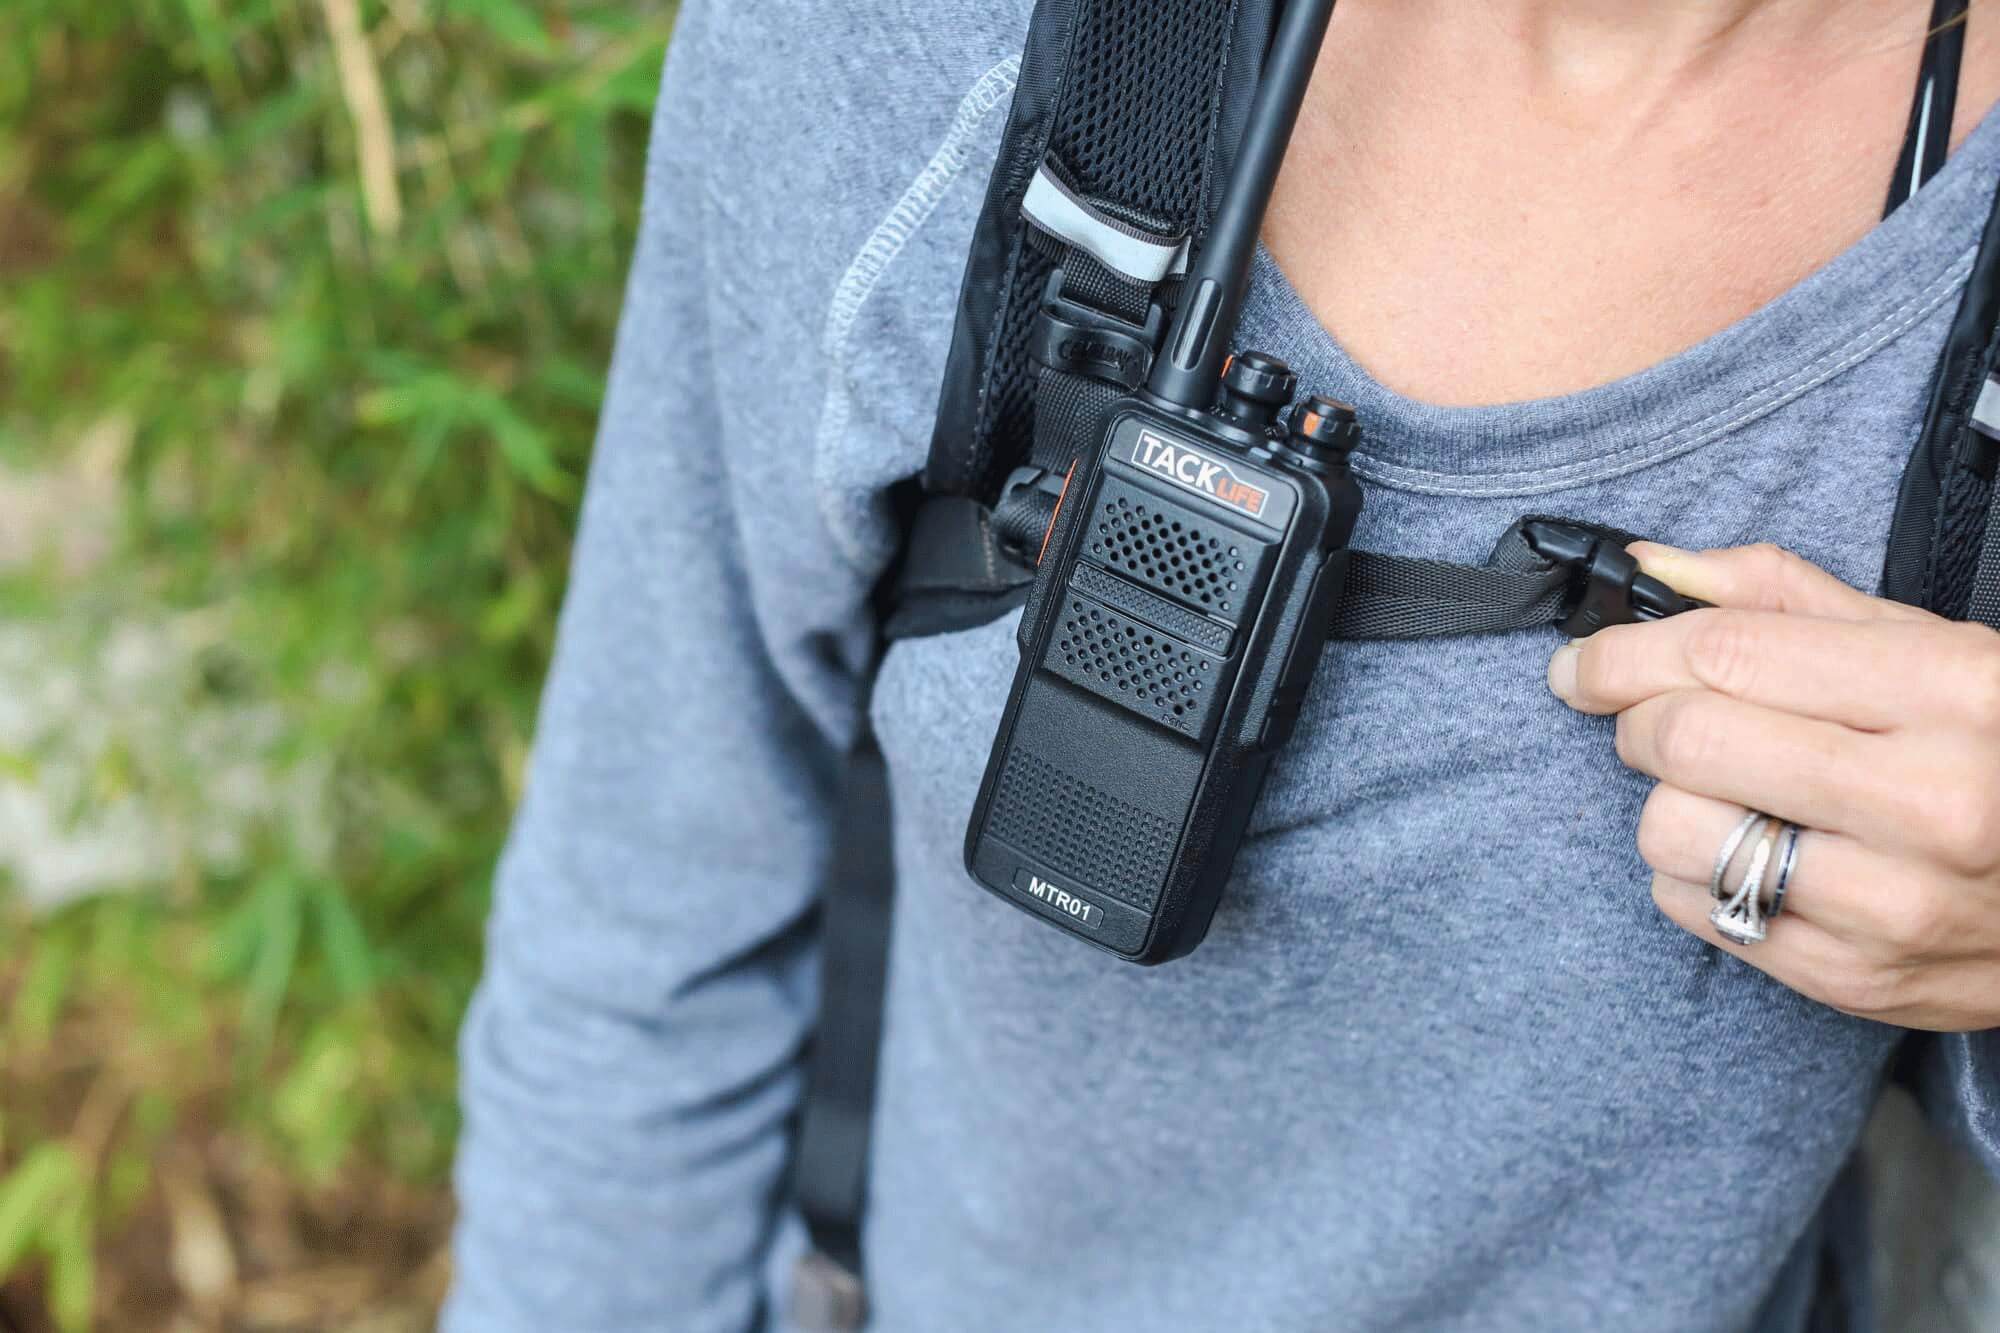 walkie talkie clipped to backpack strap